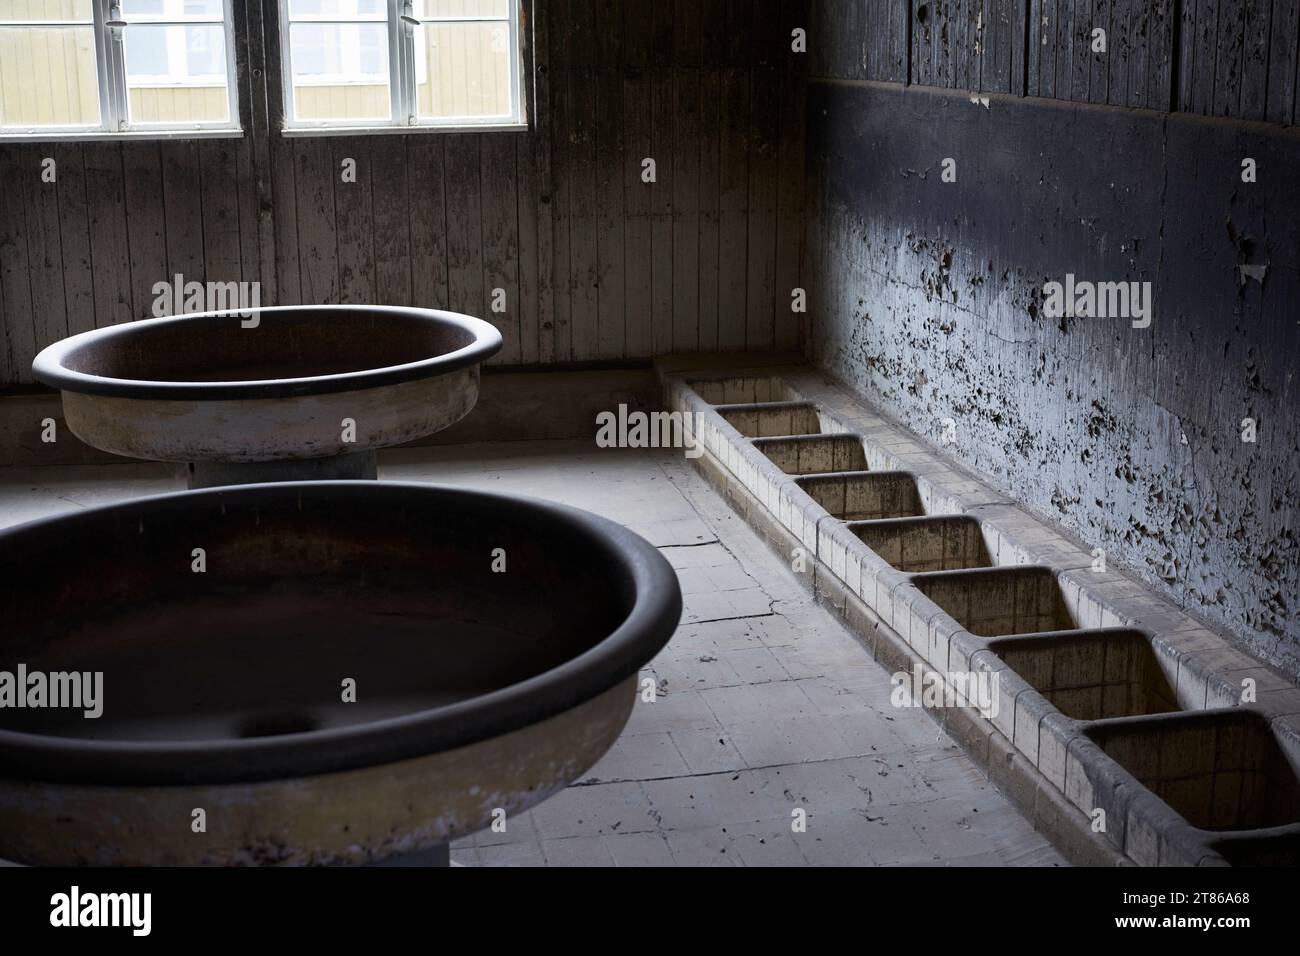 Accomodation for jewish prisoners in former Sachsenhausen concentration camp. Stock Photo